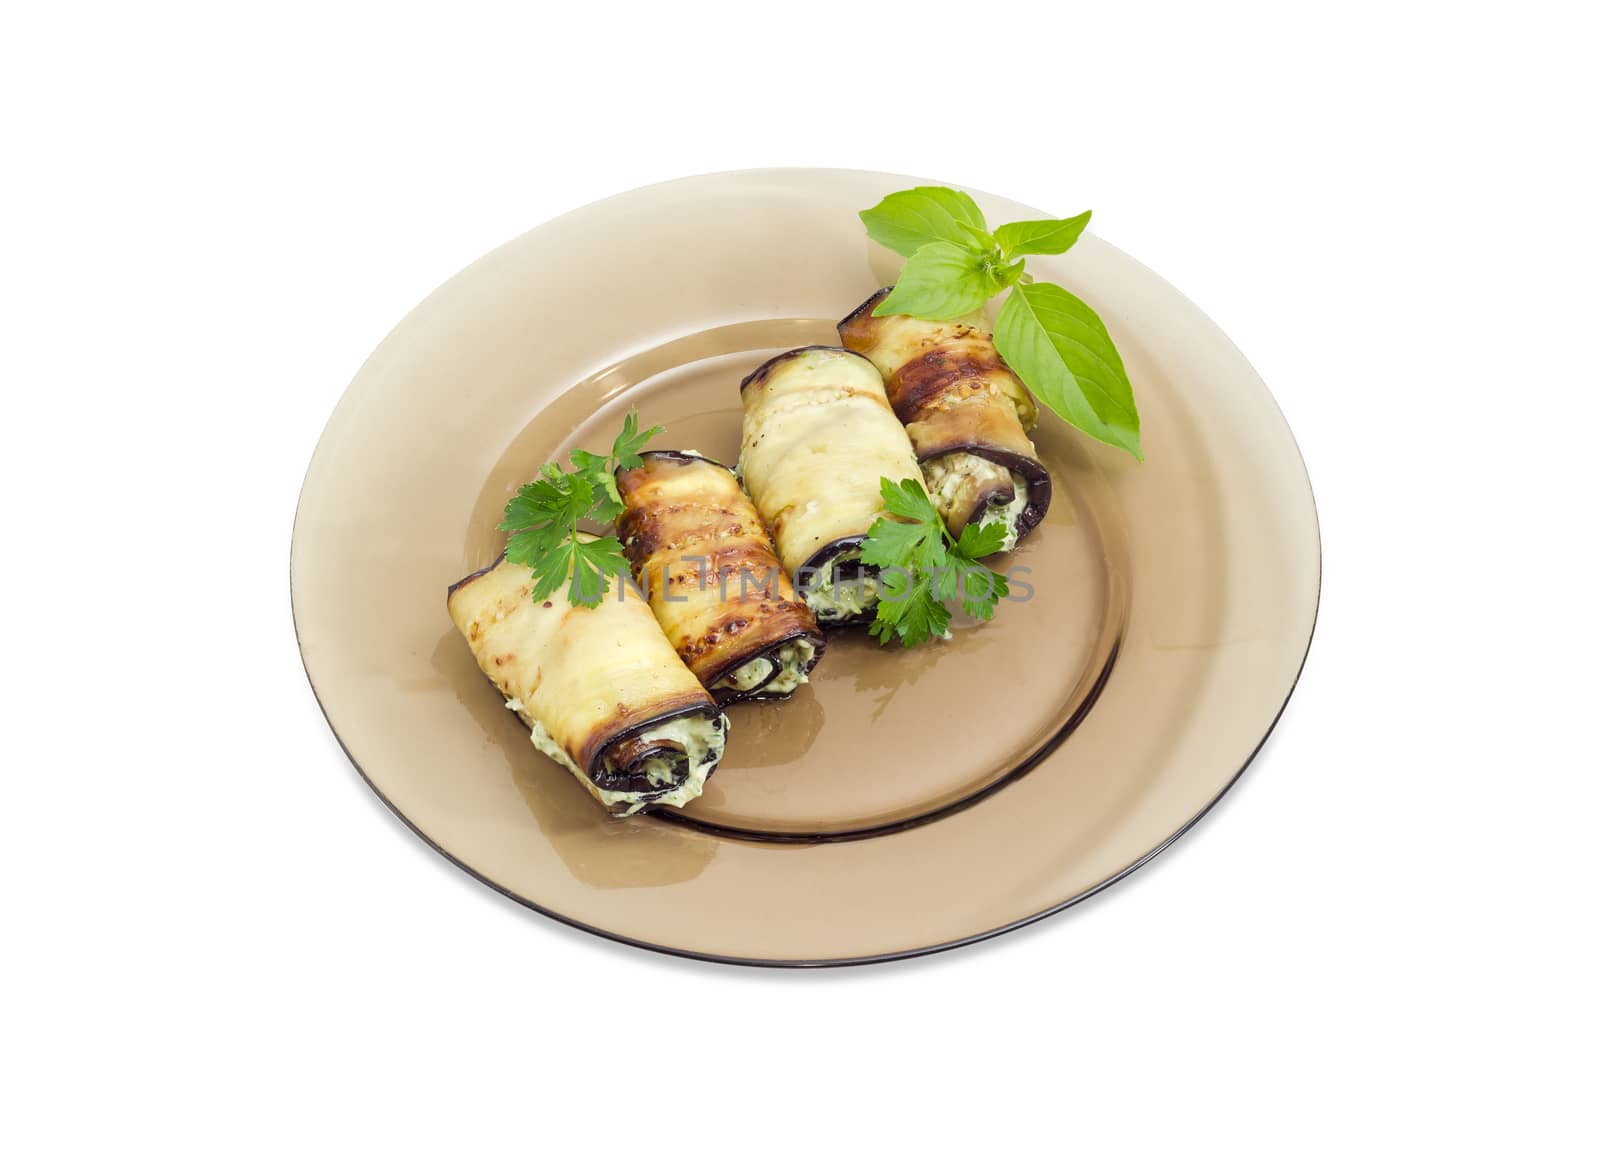 Eggplant rolls with tuna and processed cheese filling  by anmbph